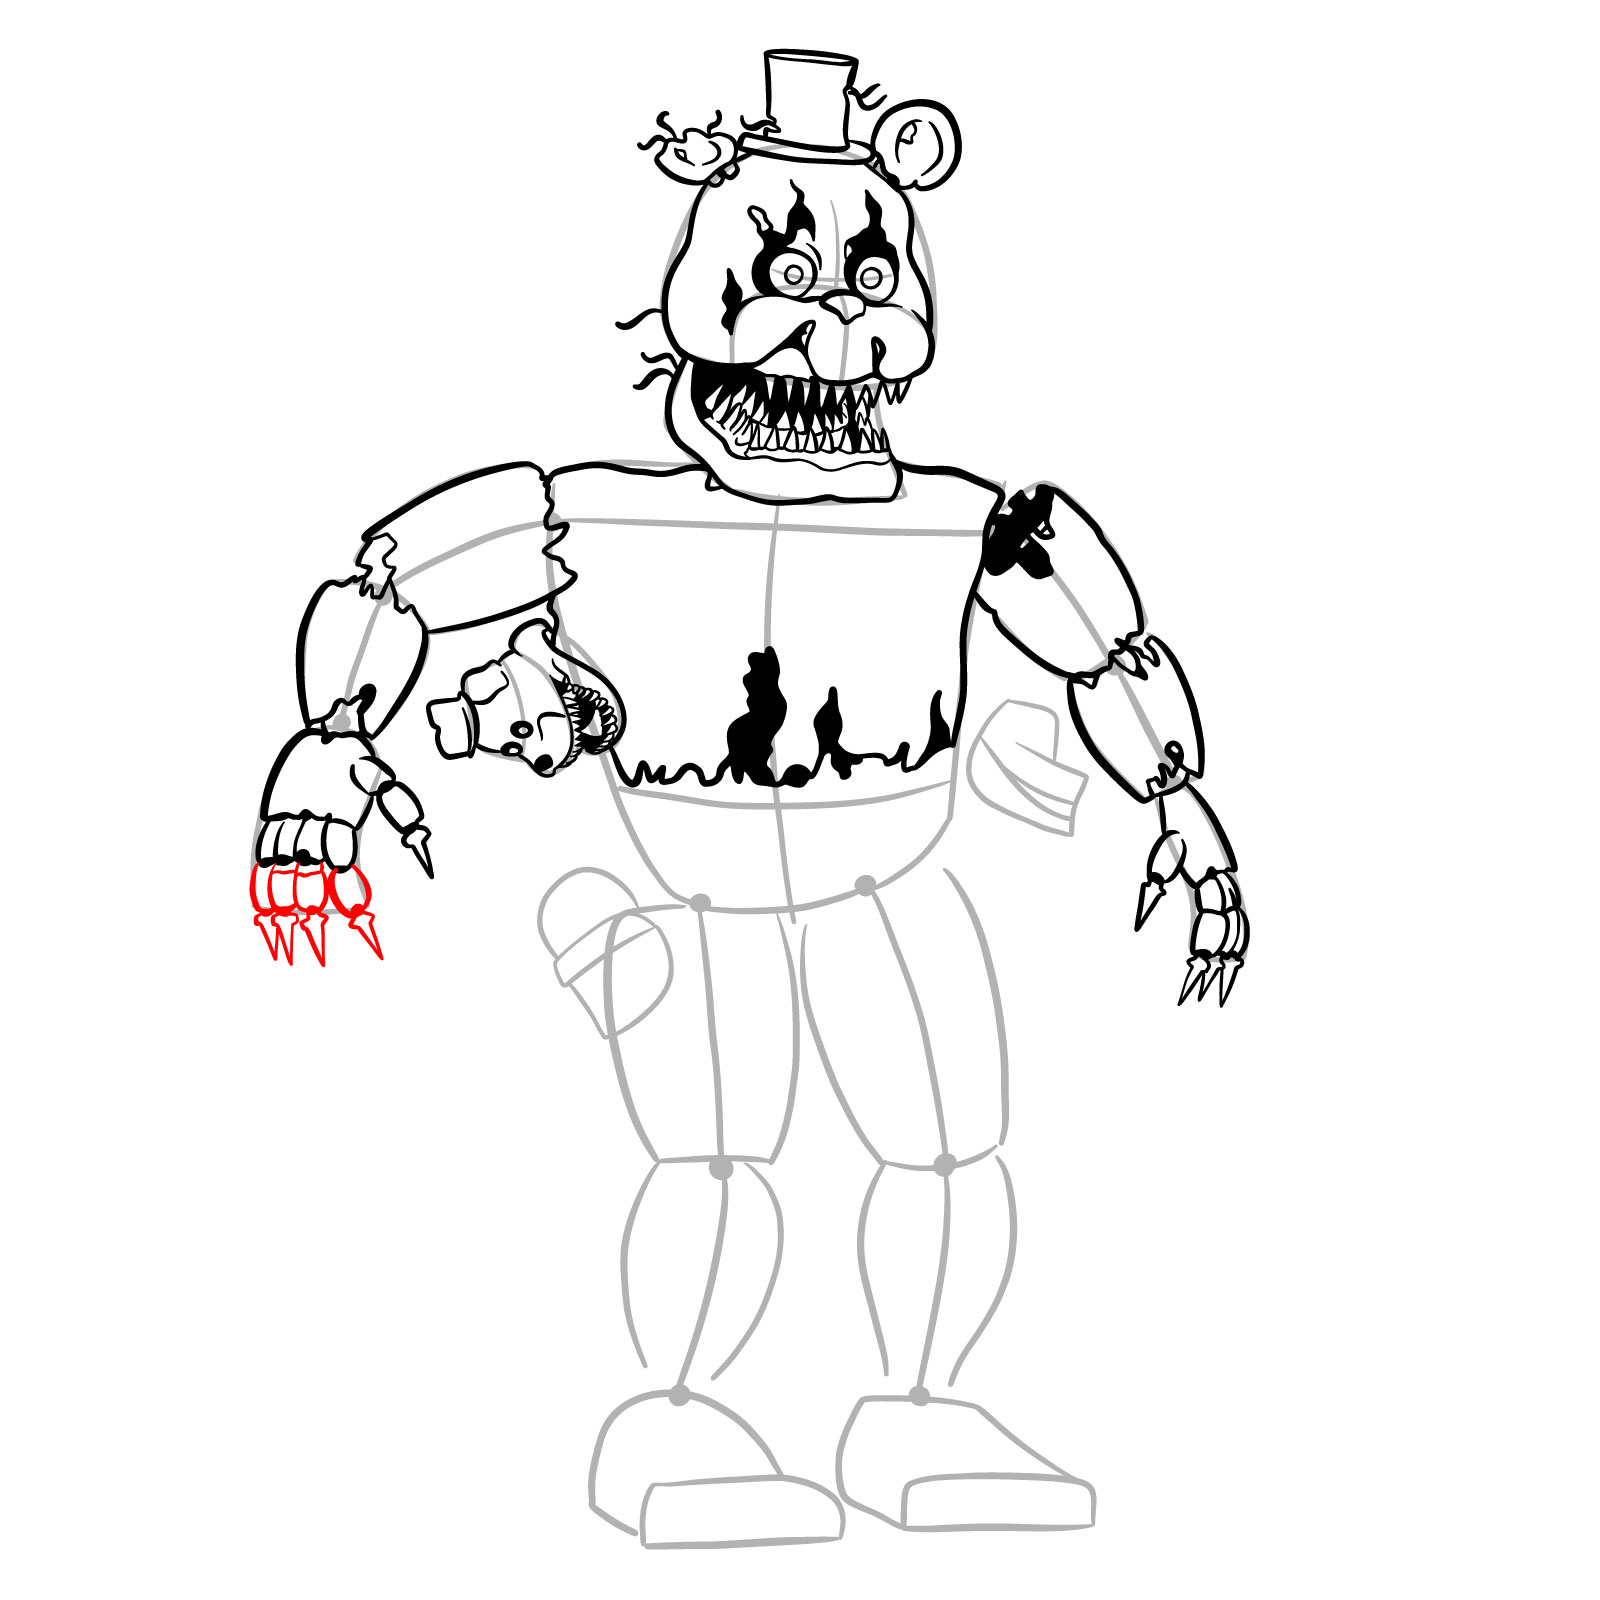 How to draw Nightmare Freddy - step 29